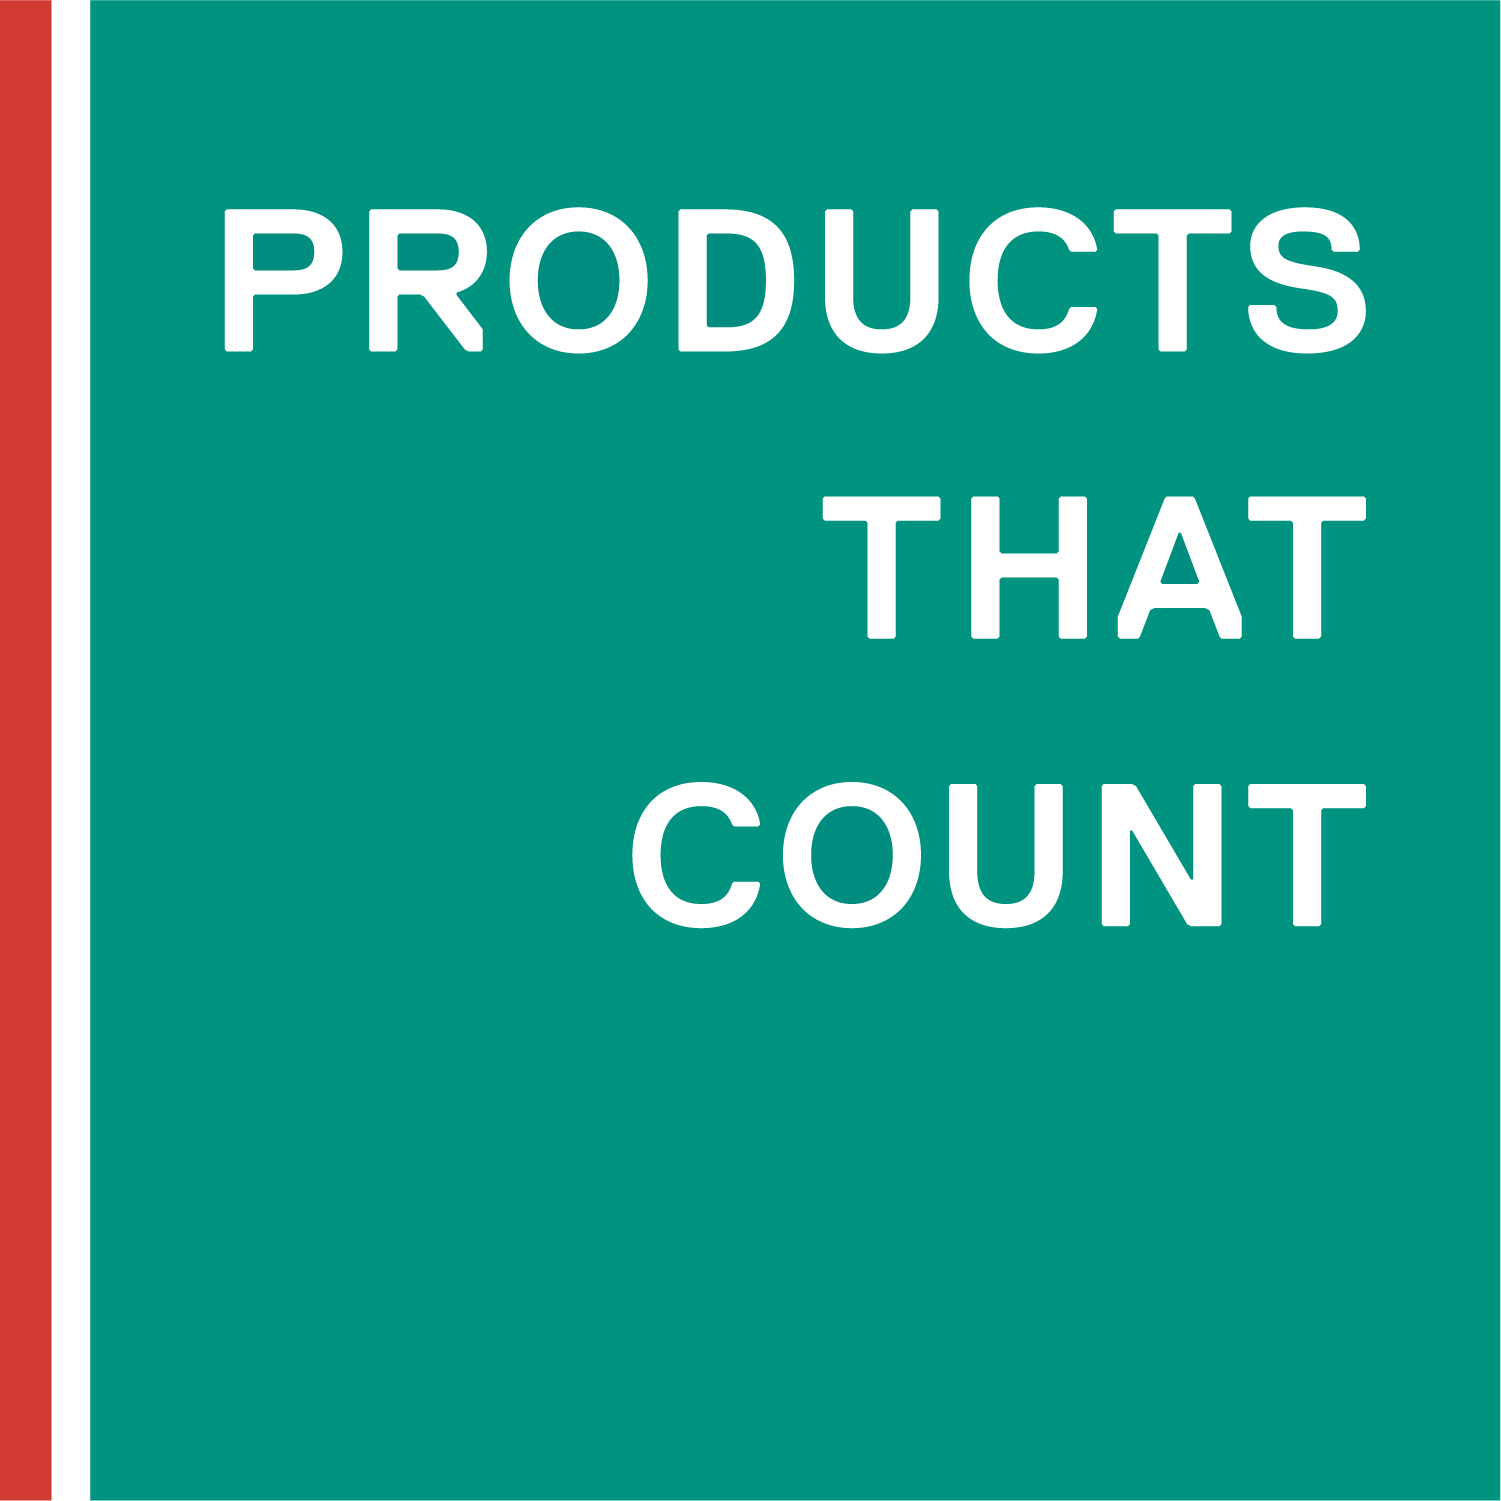 Product Management Blog Products That Count - https://web.roblox.com/homer